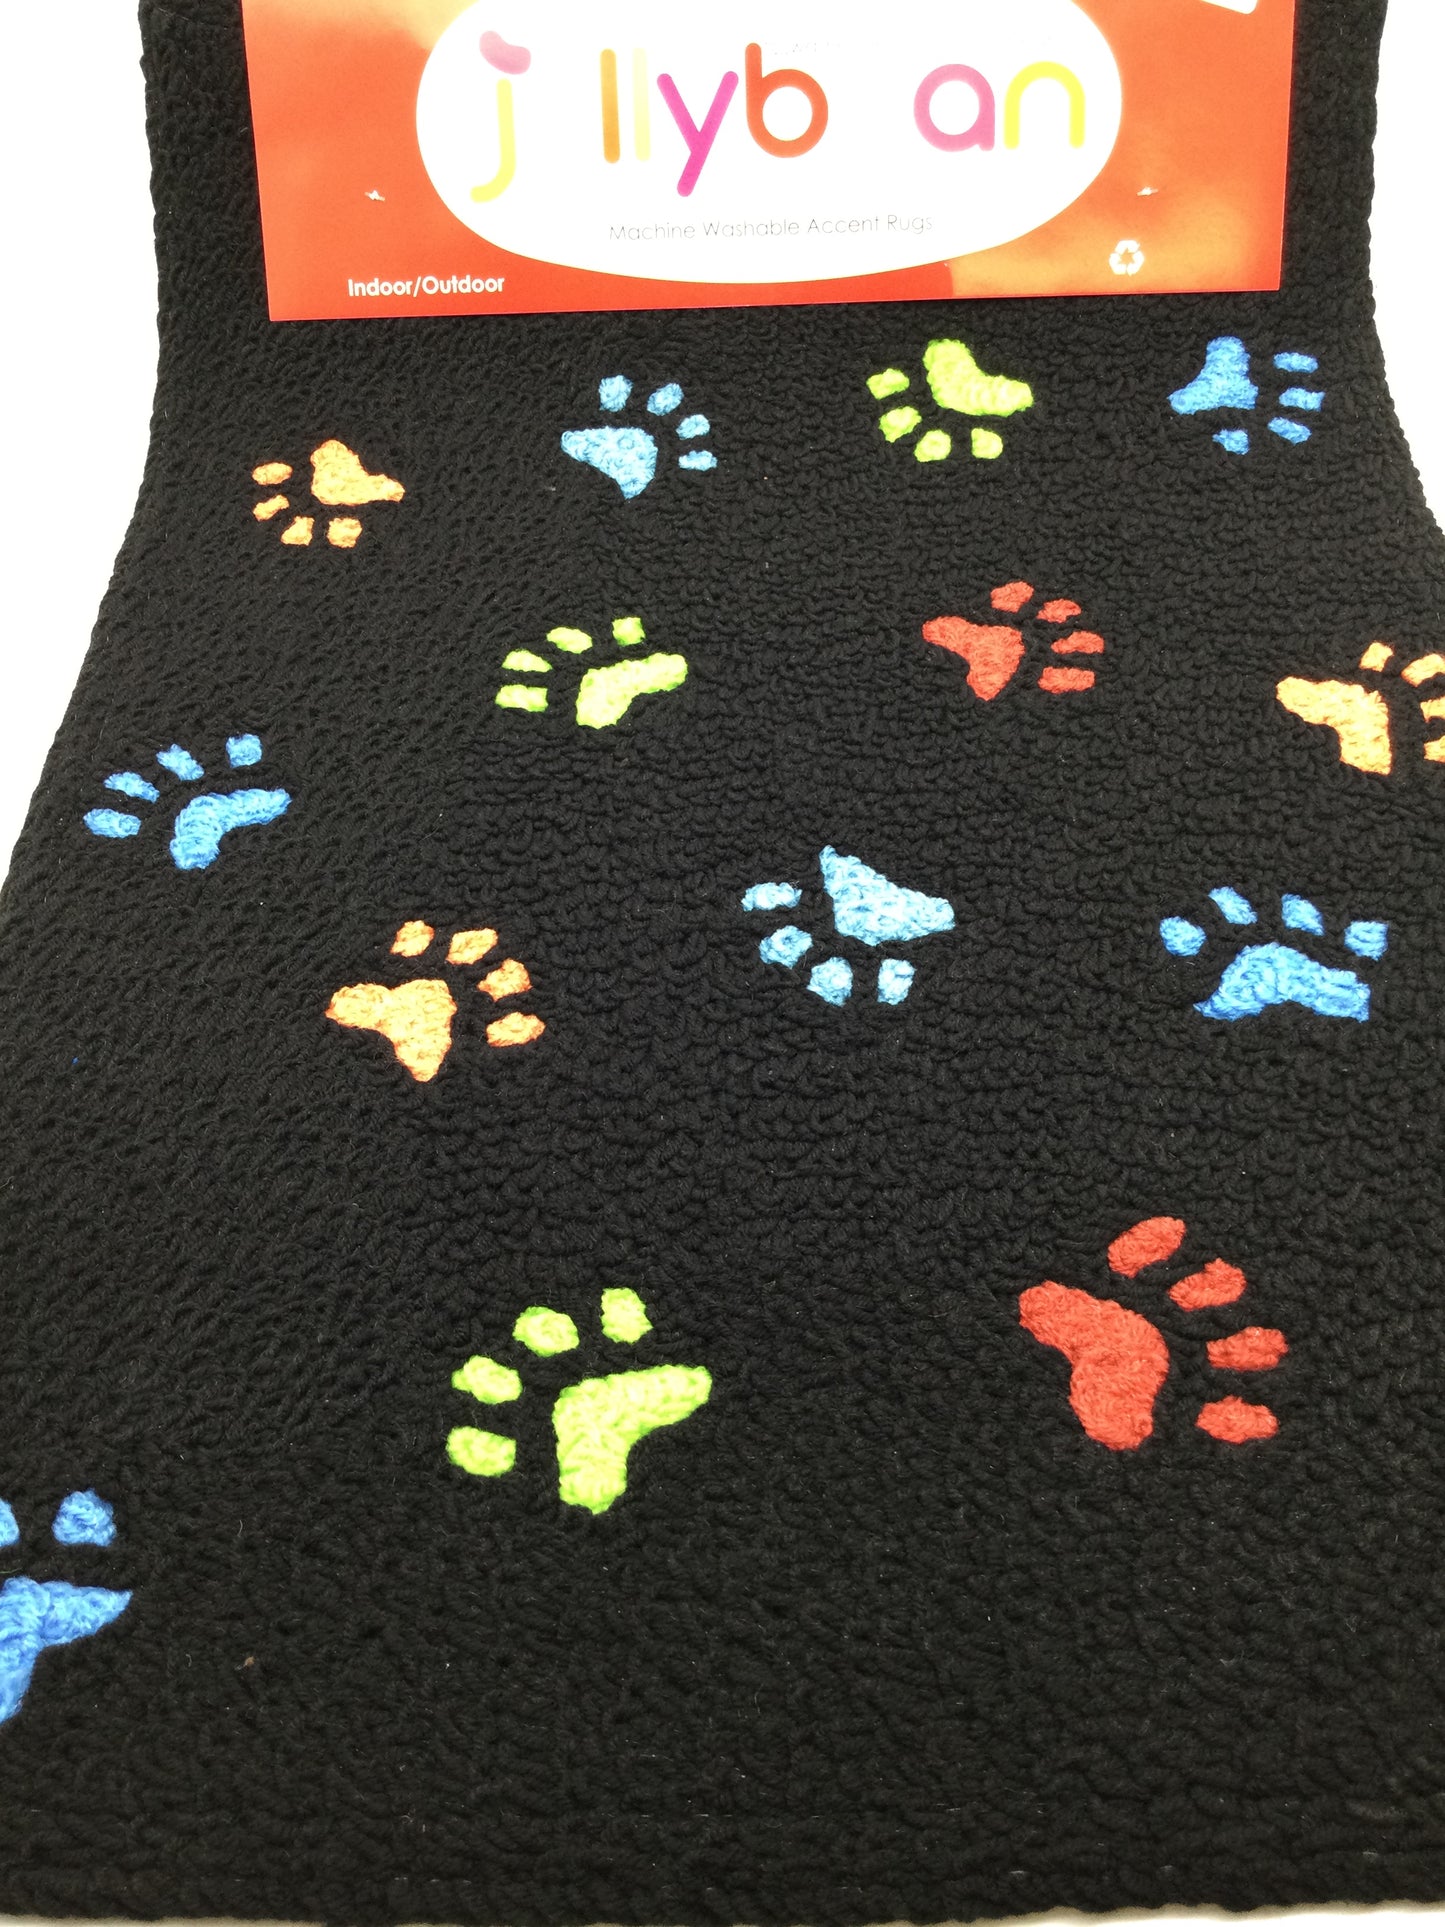 Jelly Bean Washable Indoor/Outdoor Carpets - Paw Prints